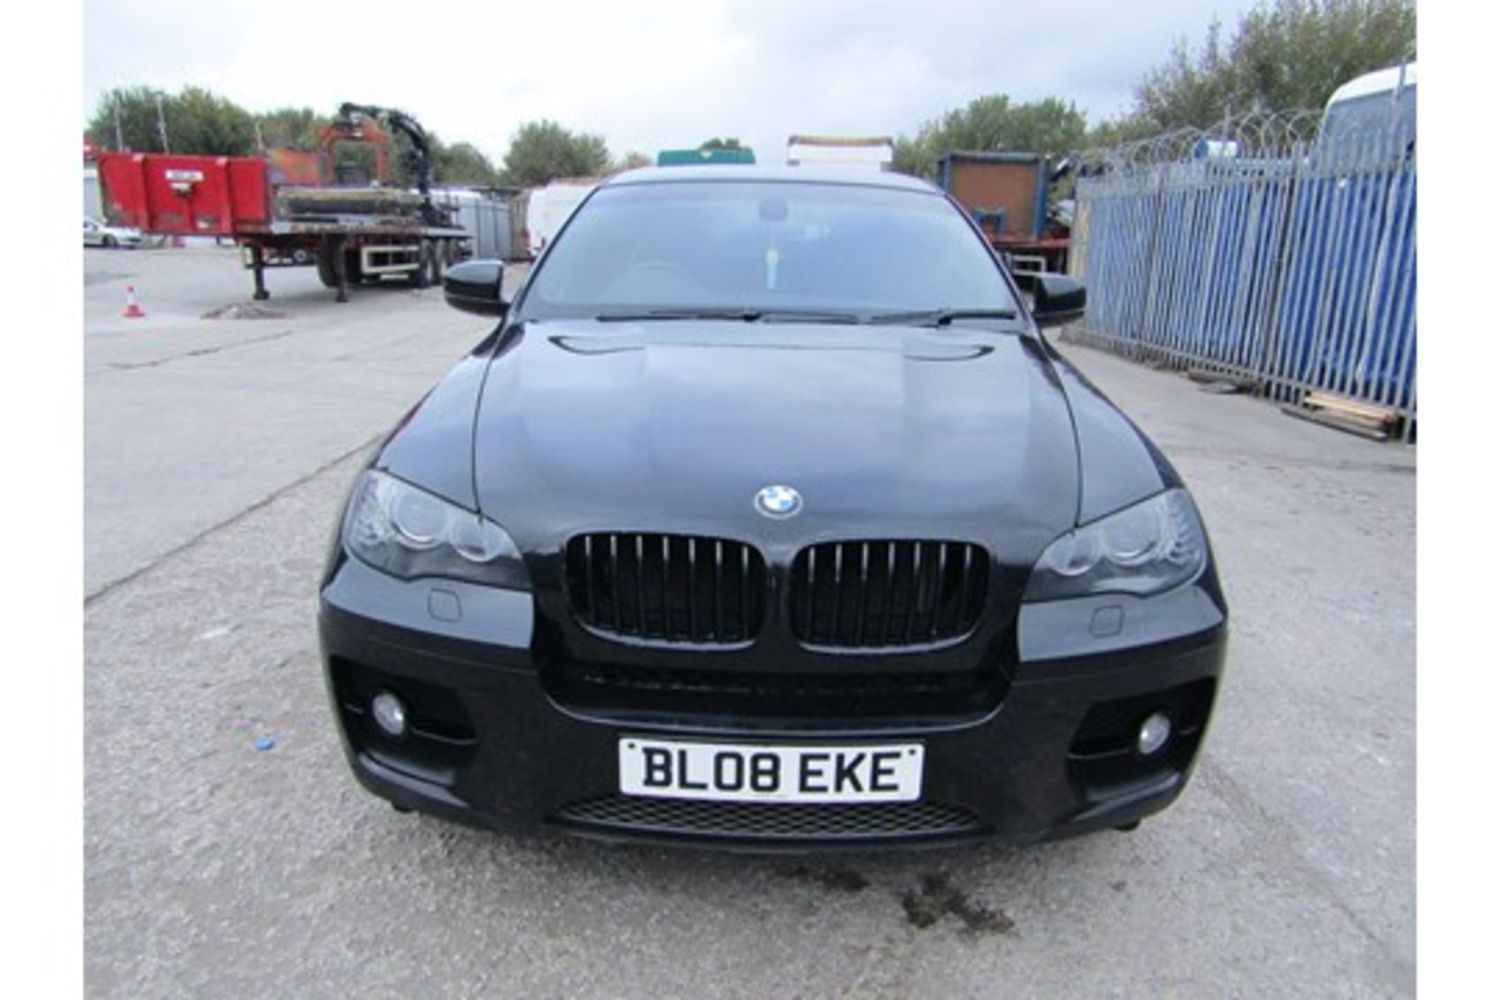 Vehicle Auction Of BMW X6 35D & Vauxhall Astra Estate